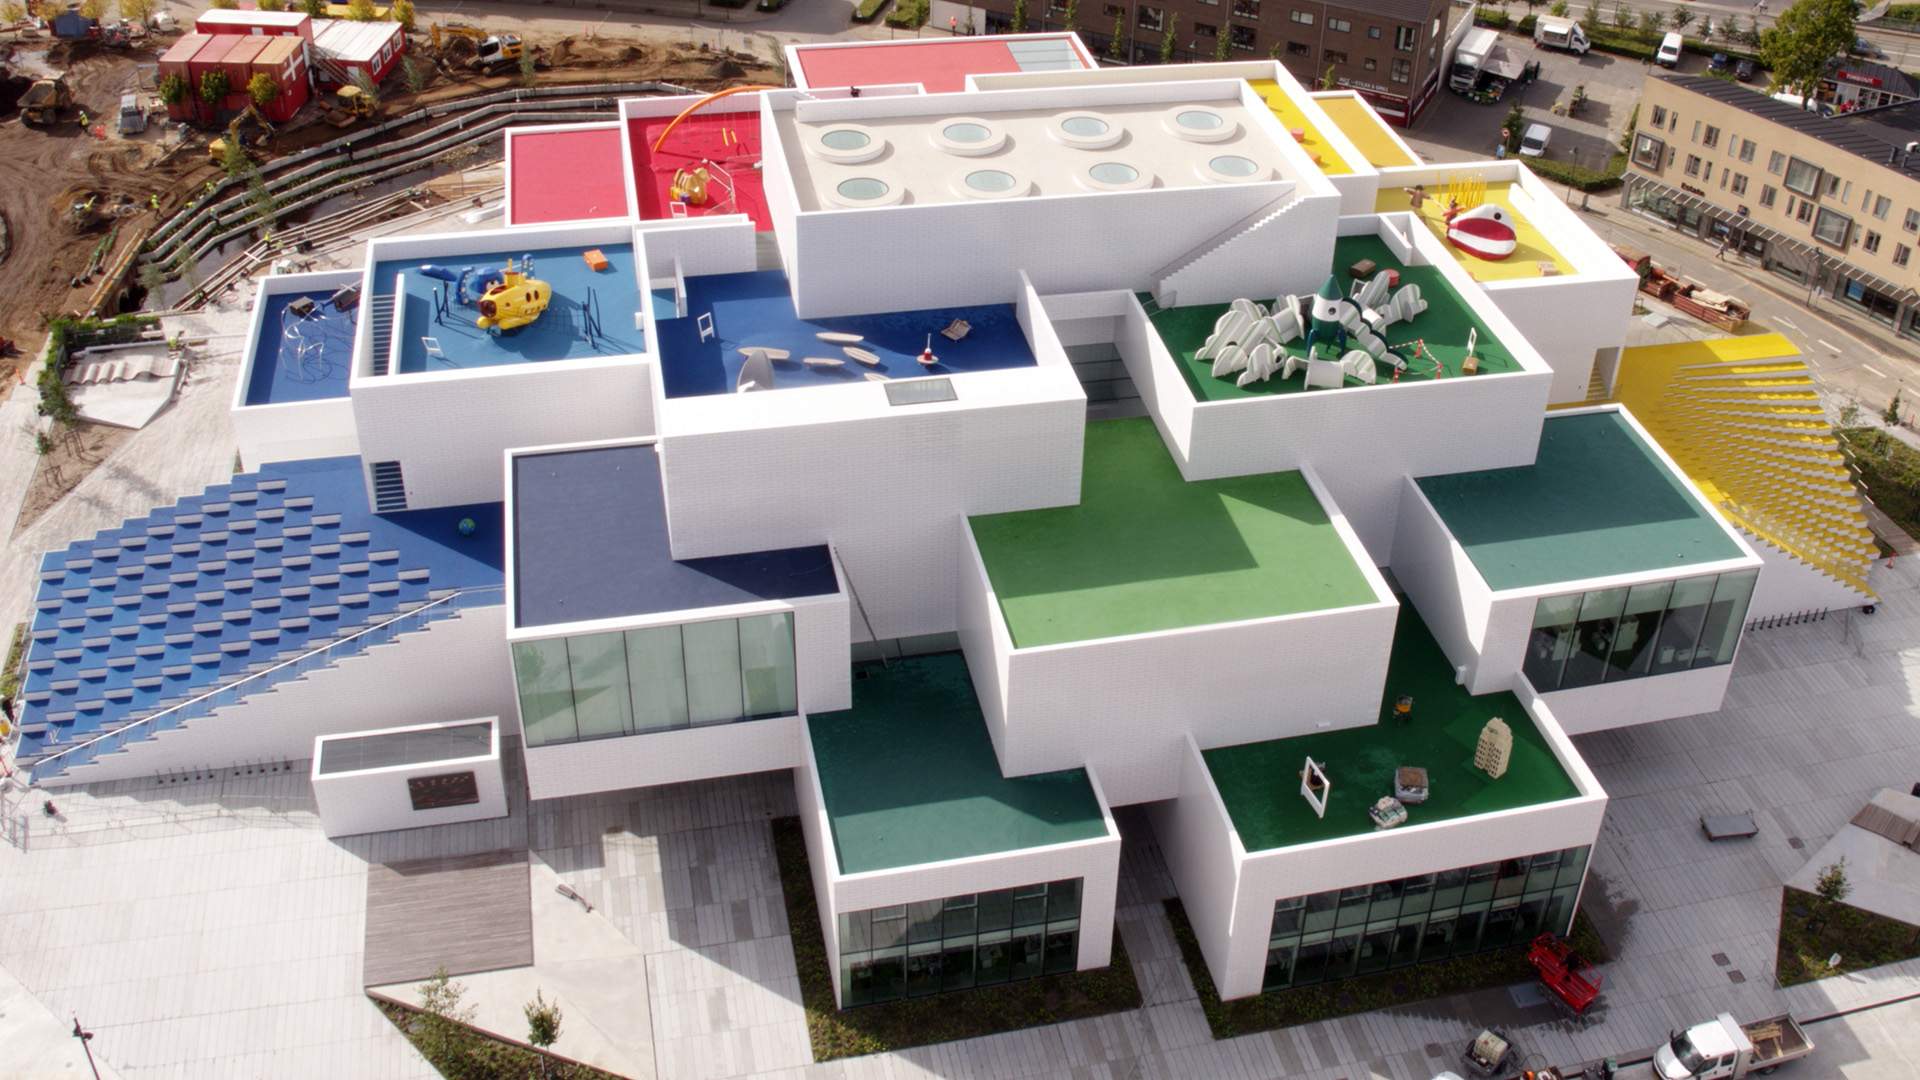 A Life-Sized Lego House Has Opened In Denmark